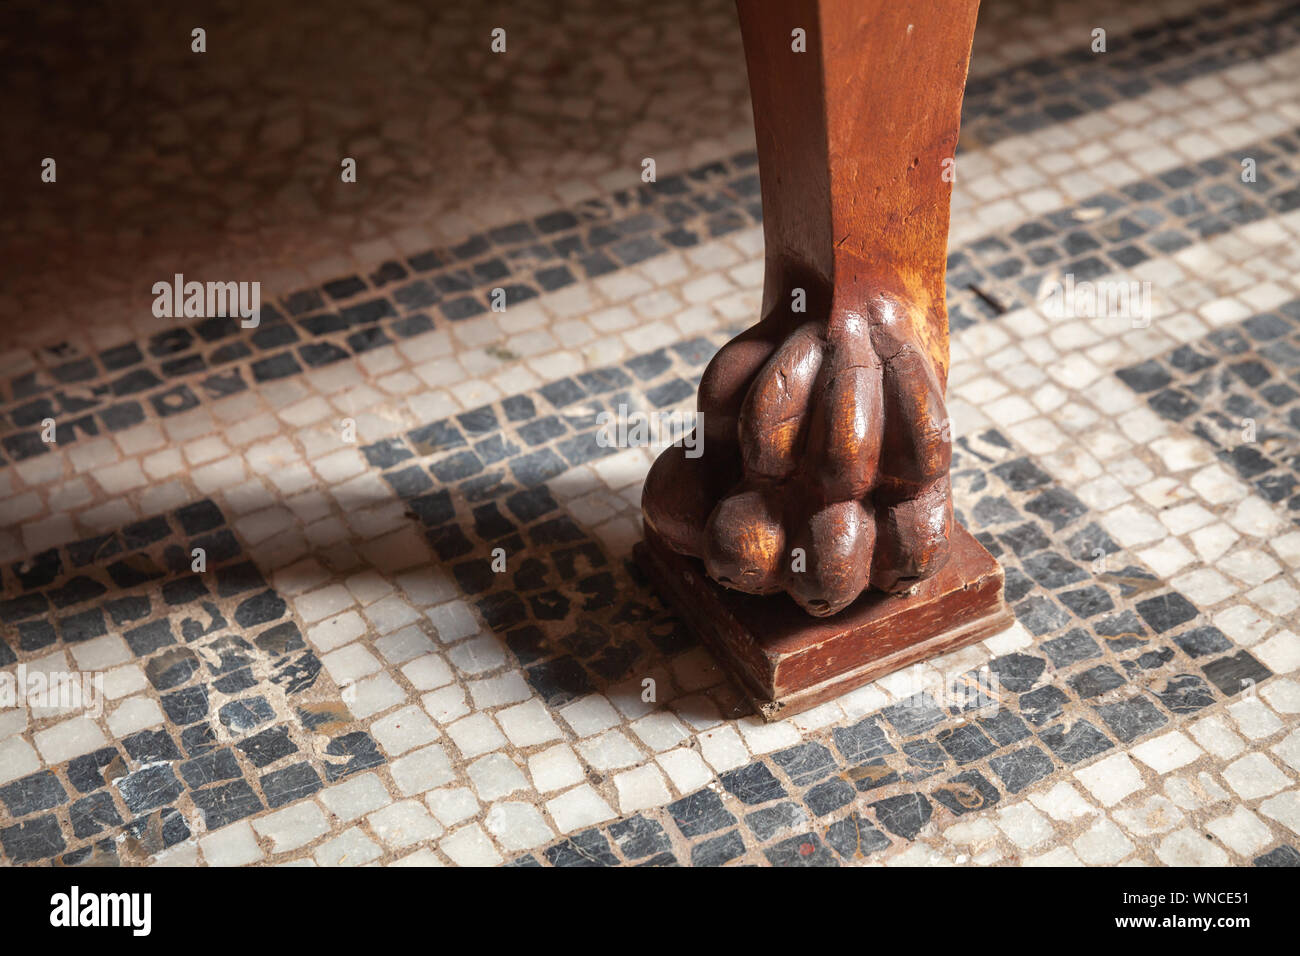 Fragment of a luxury vintage wooden table leg with lion paw carving decoration Stock Photo